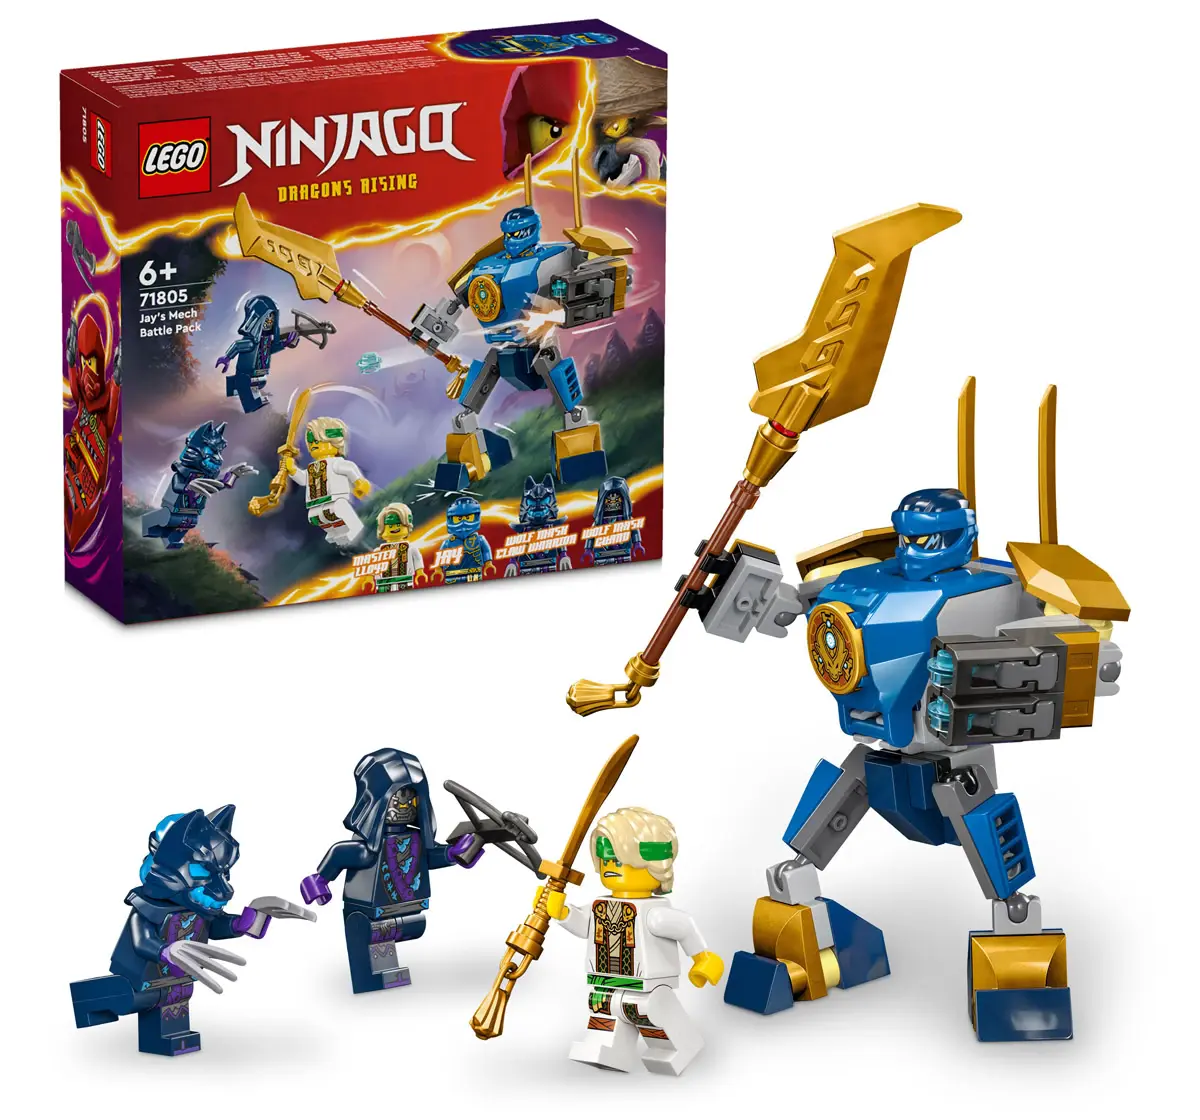 Lego Ninjago JayS Mech Battle Pack Ninja Toy 71805 Multicolour For Kids Ages 6Y+ (78 Pieces) 